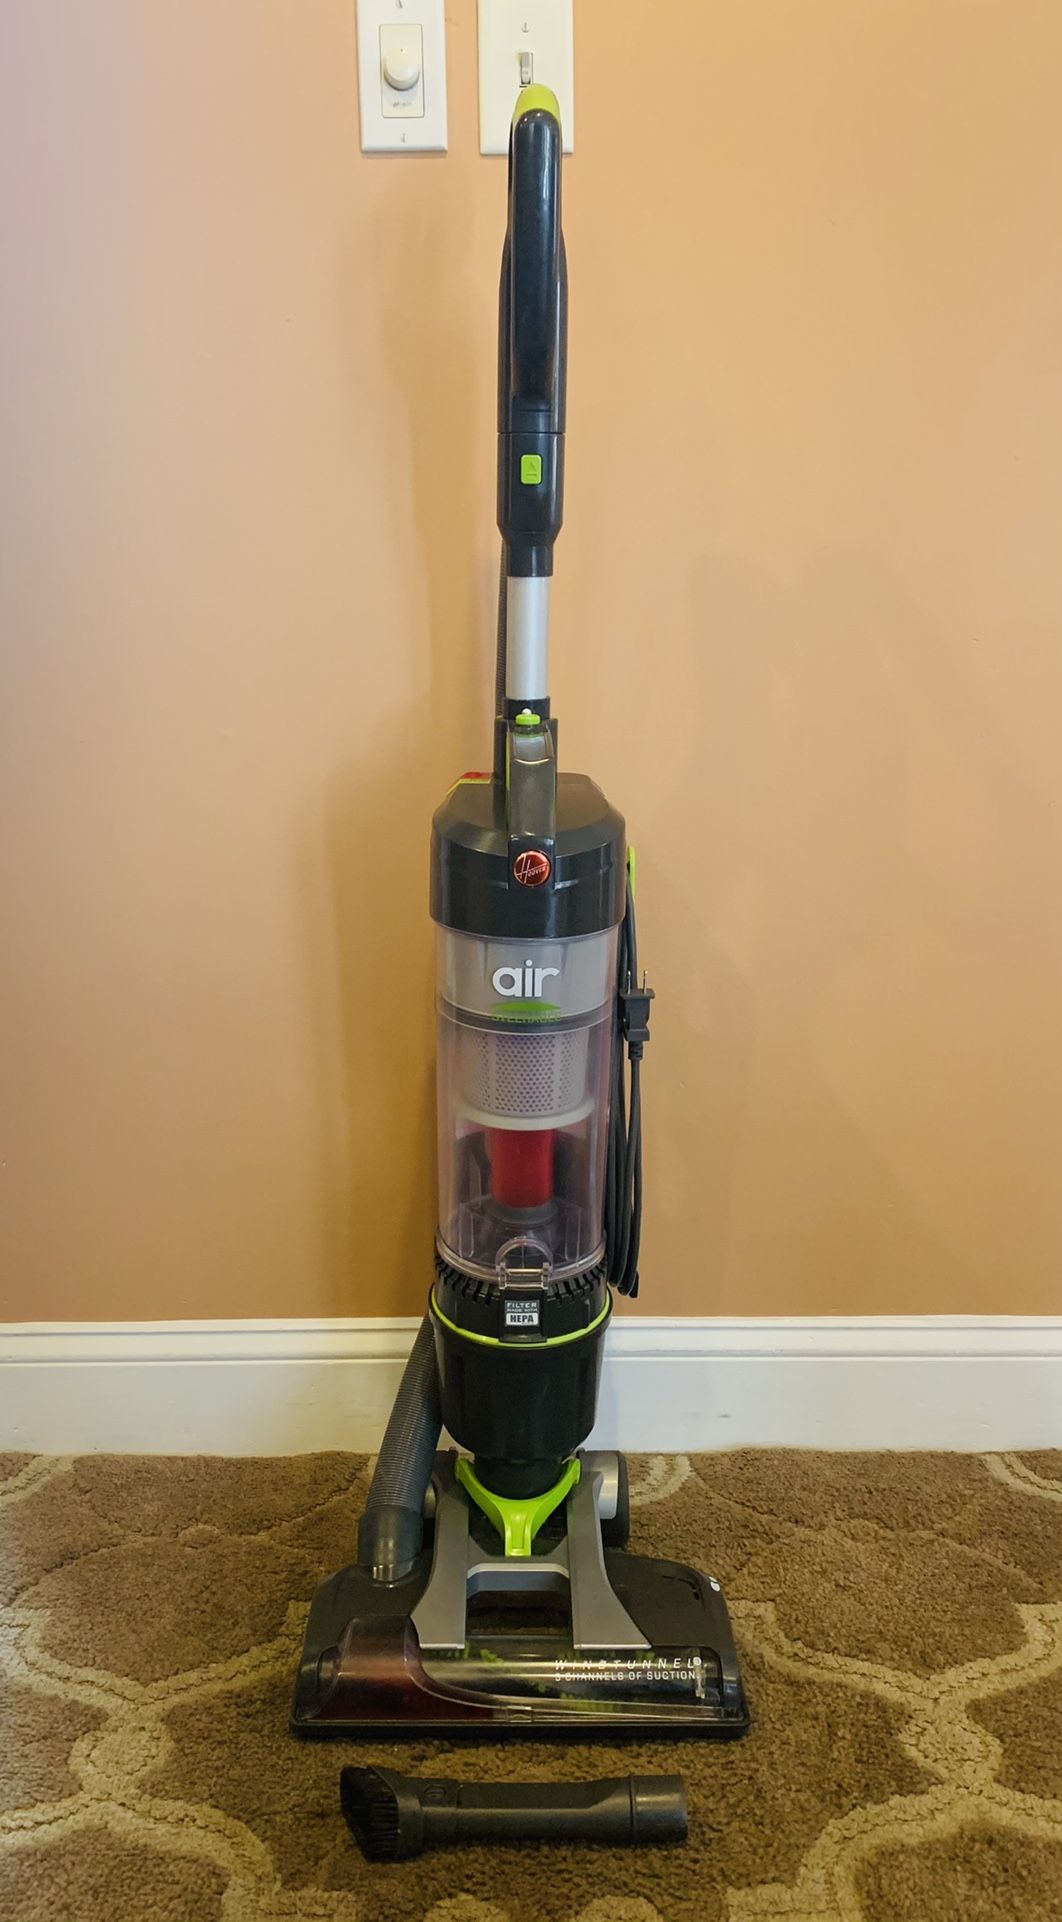 Hoover windtunnel air vacuum cleaner